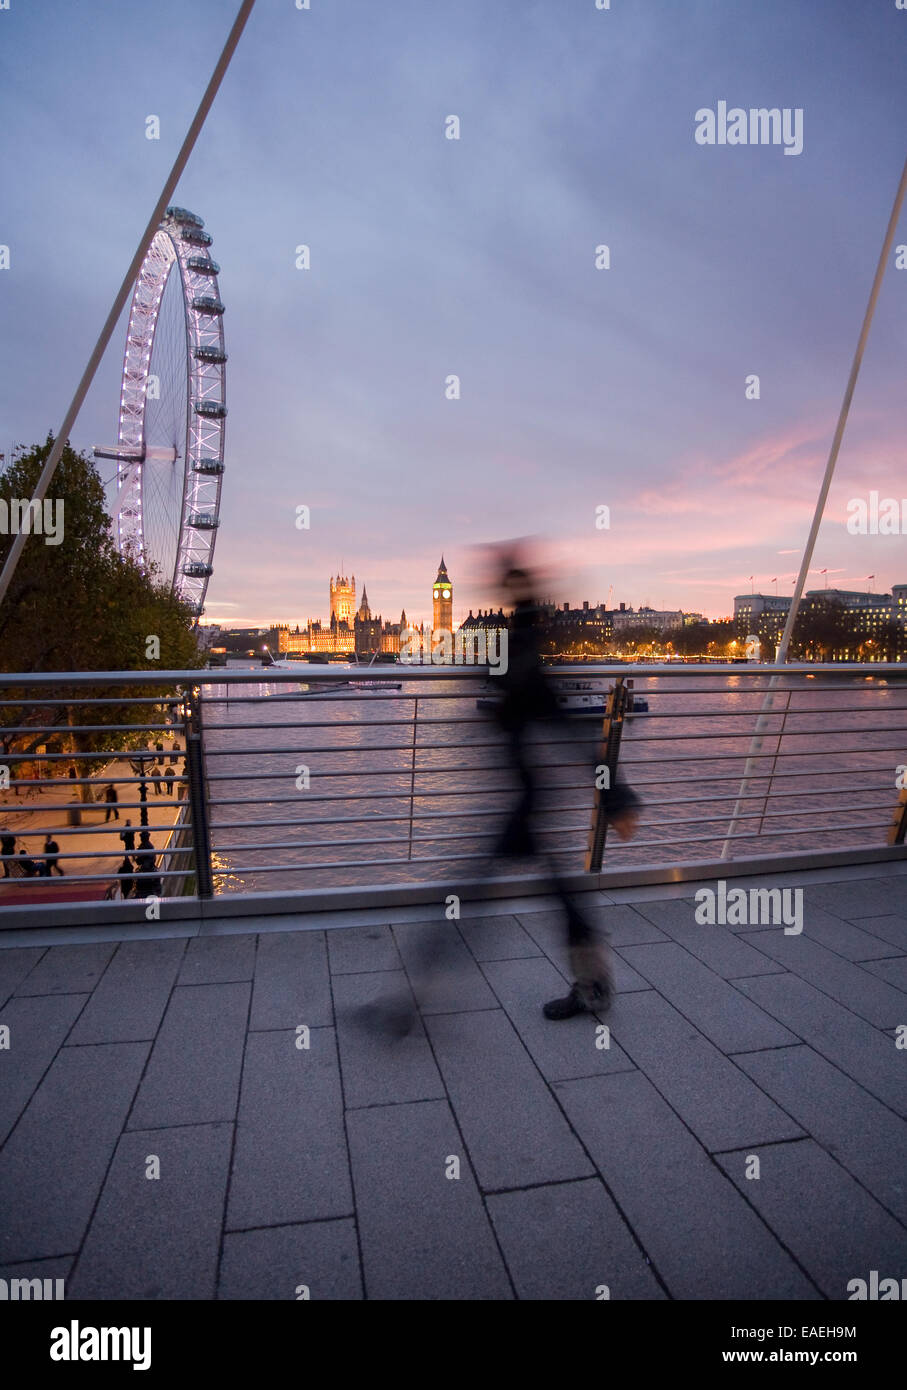 blurred unrecognisable person walking over Hungerford (Golden Jubilee) Bridge, London Stock Photo